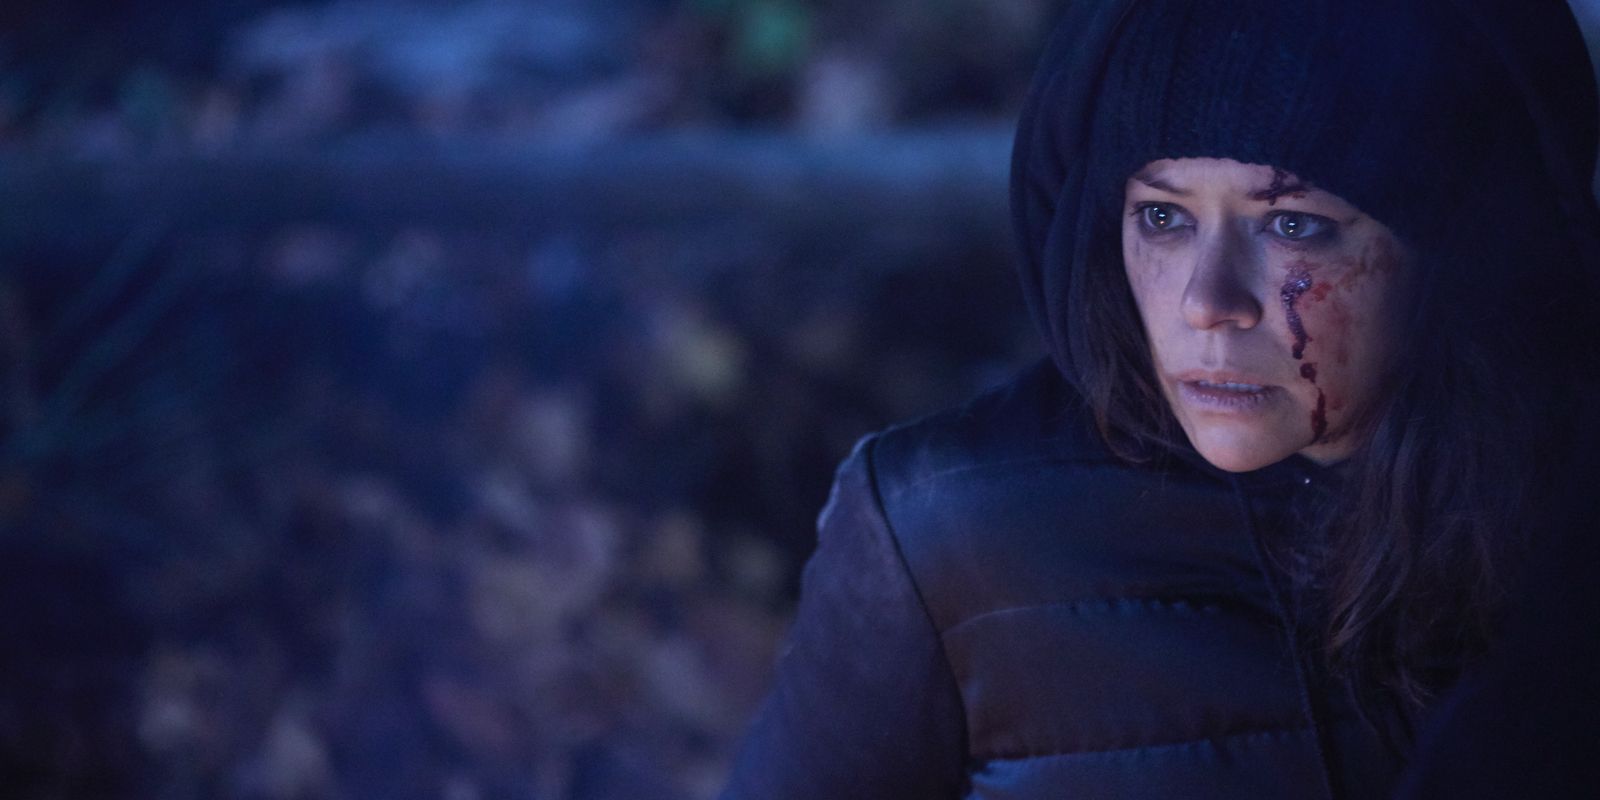 Orphan Black The Final Season Premiere Expertly Sets Up The Series' Endgame